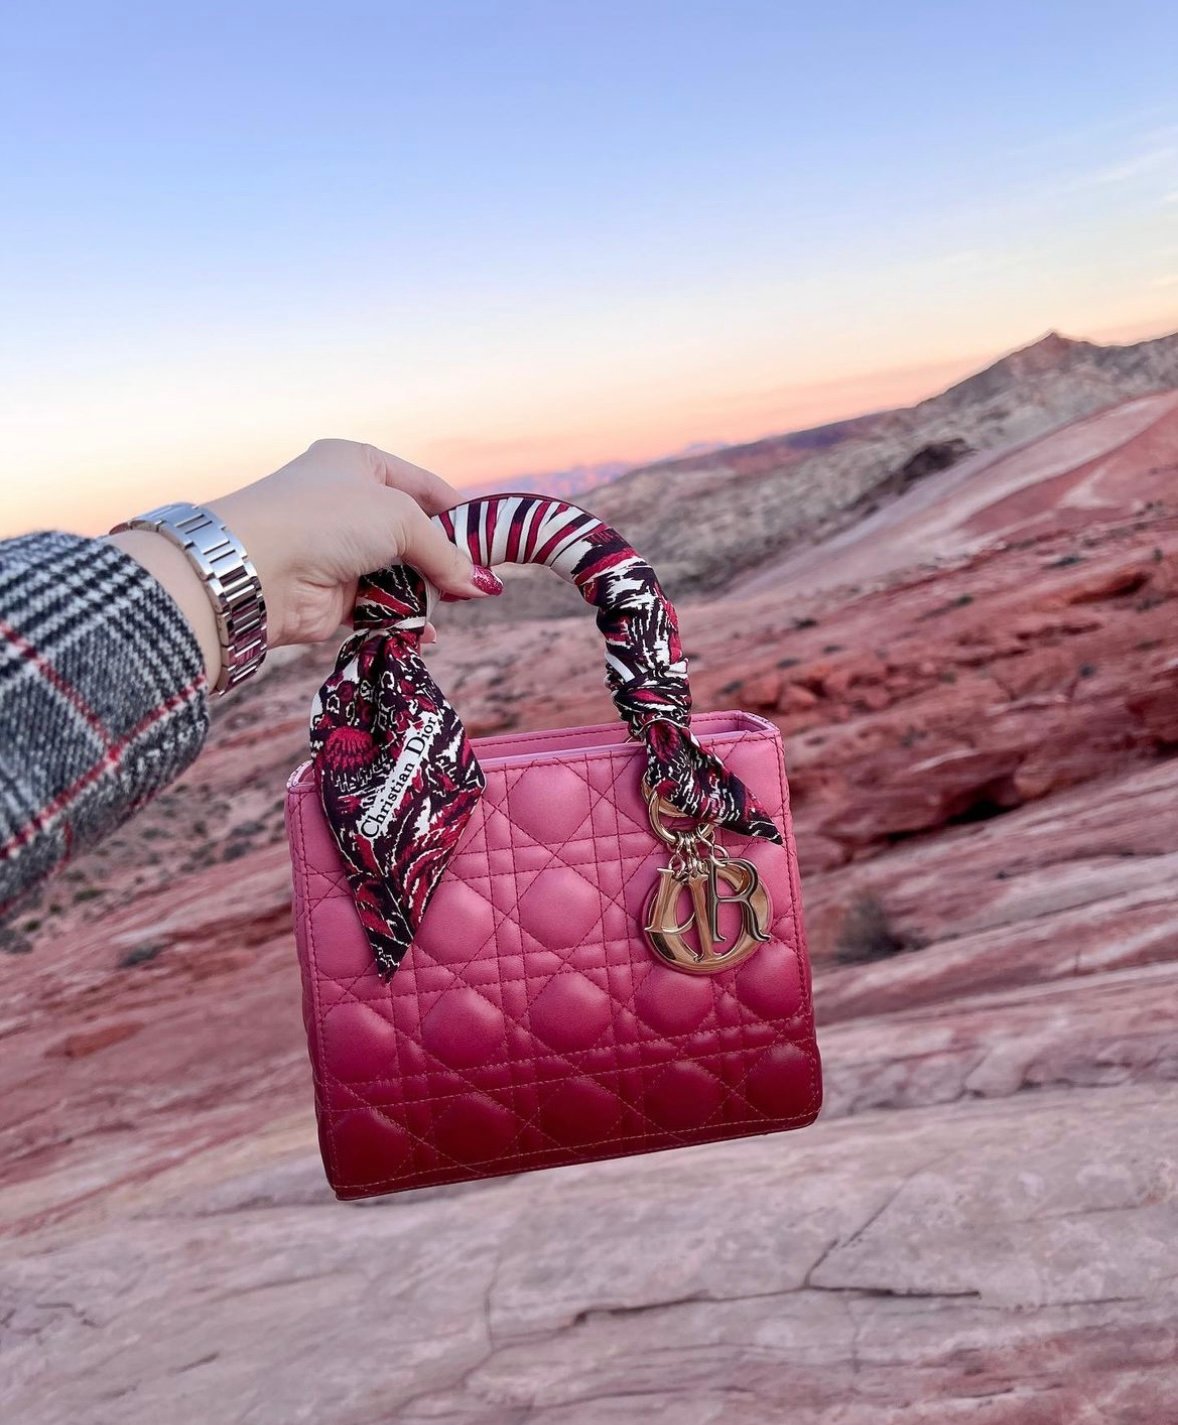 Top 7 Dior Bags to Buy in 2023 - luxfy